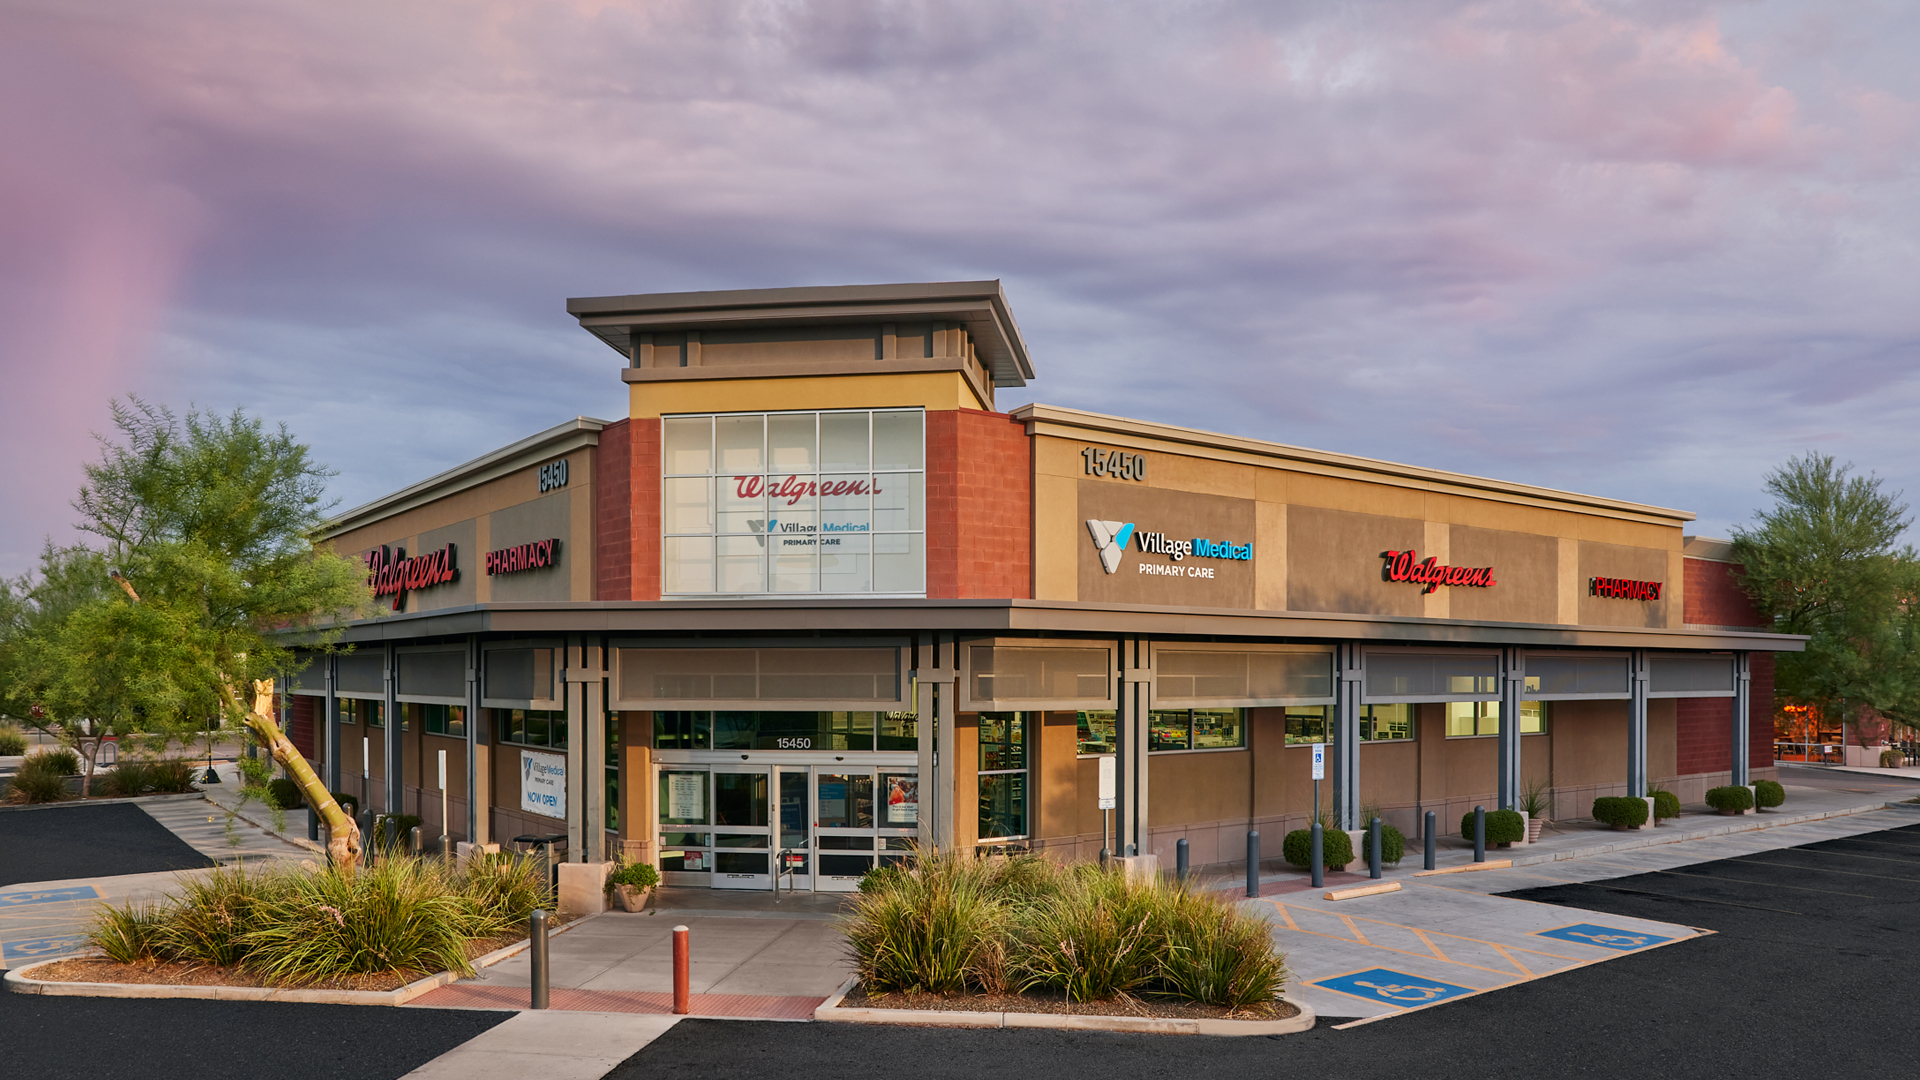 A Walgreens store in Phoenix shows a sign for Village Medical primary care on the side, along with a now open sign. 